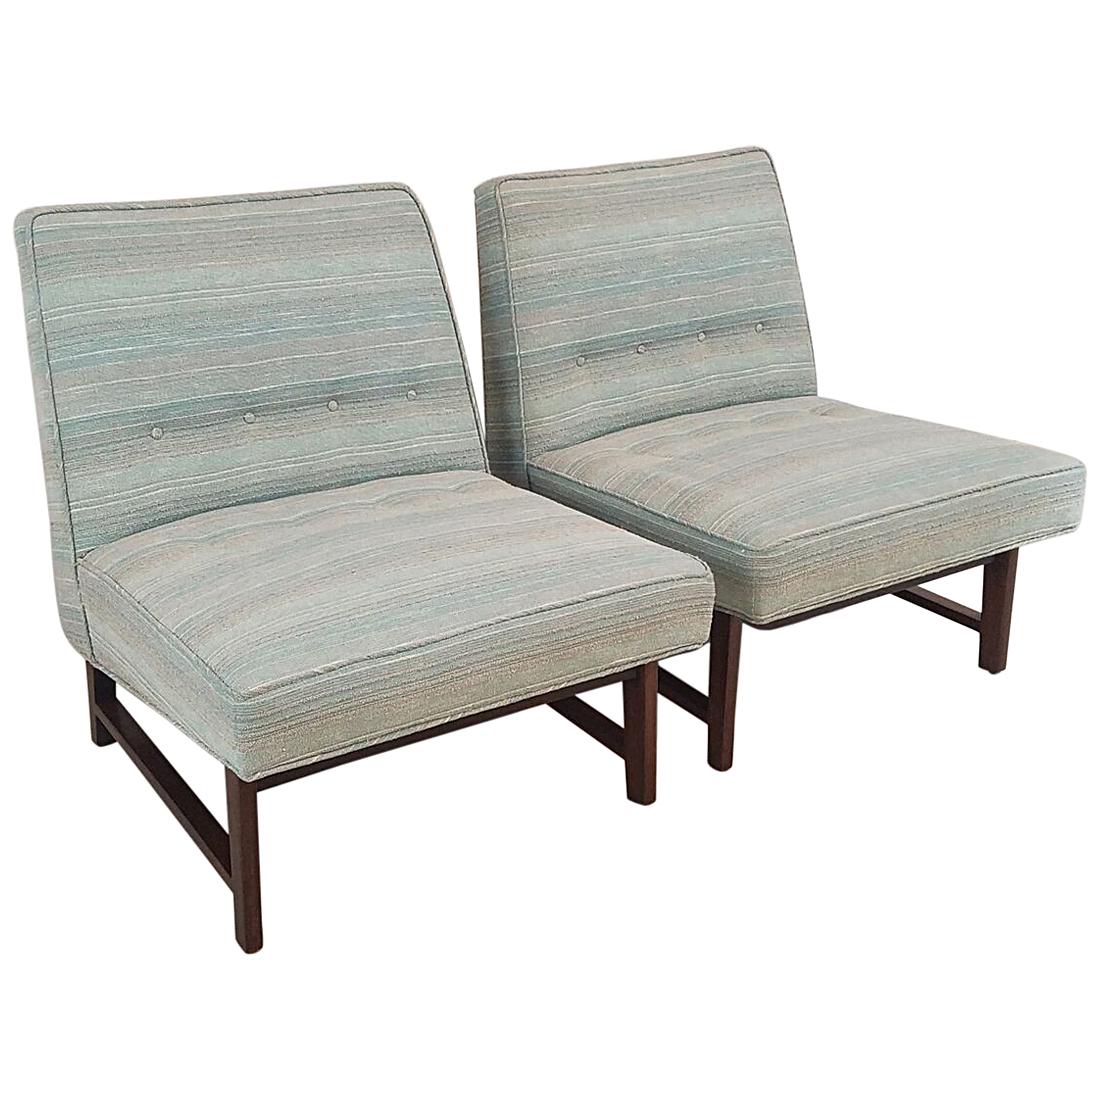 Pair of Mid-Century Modern Slipper Chairs by Edward Wormley for Dunbar